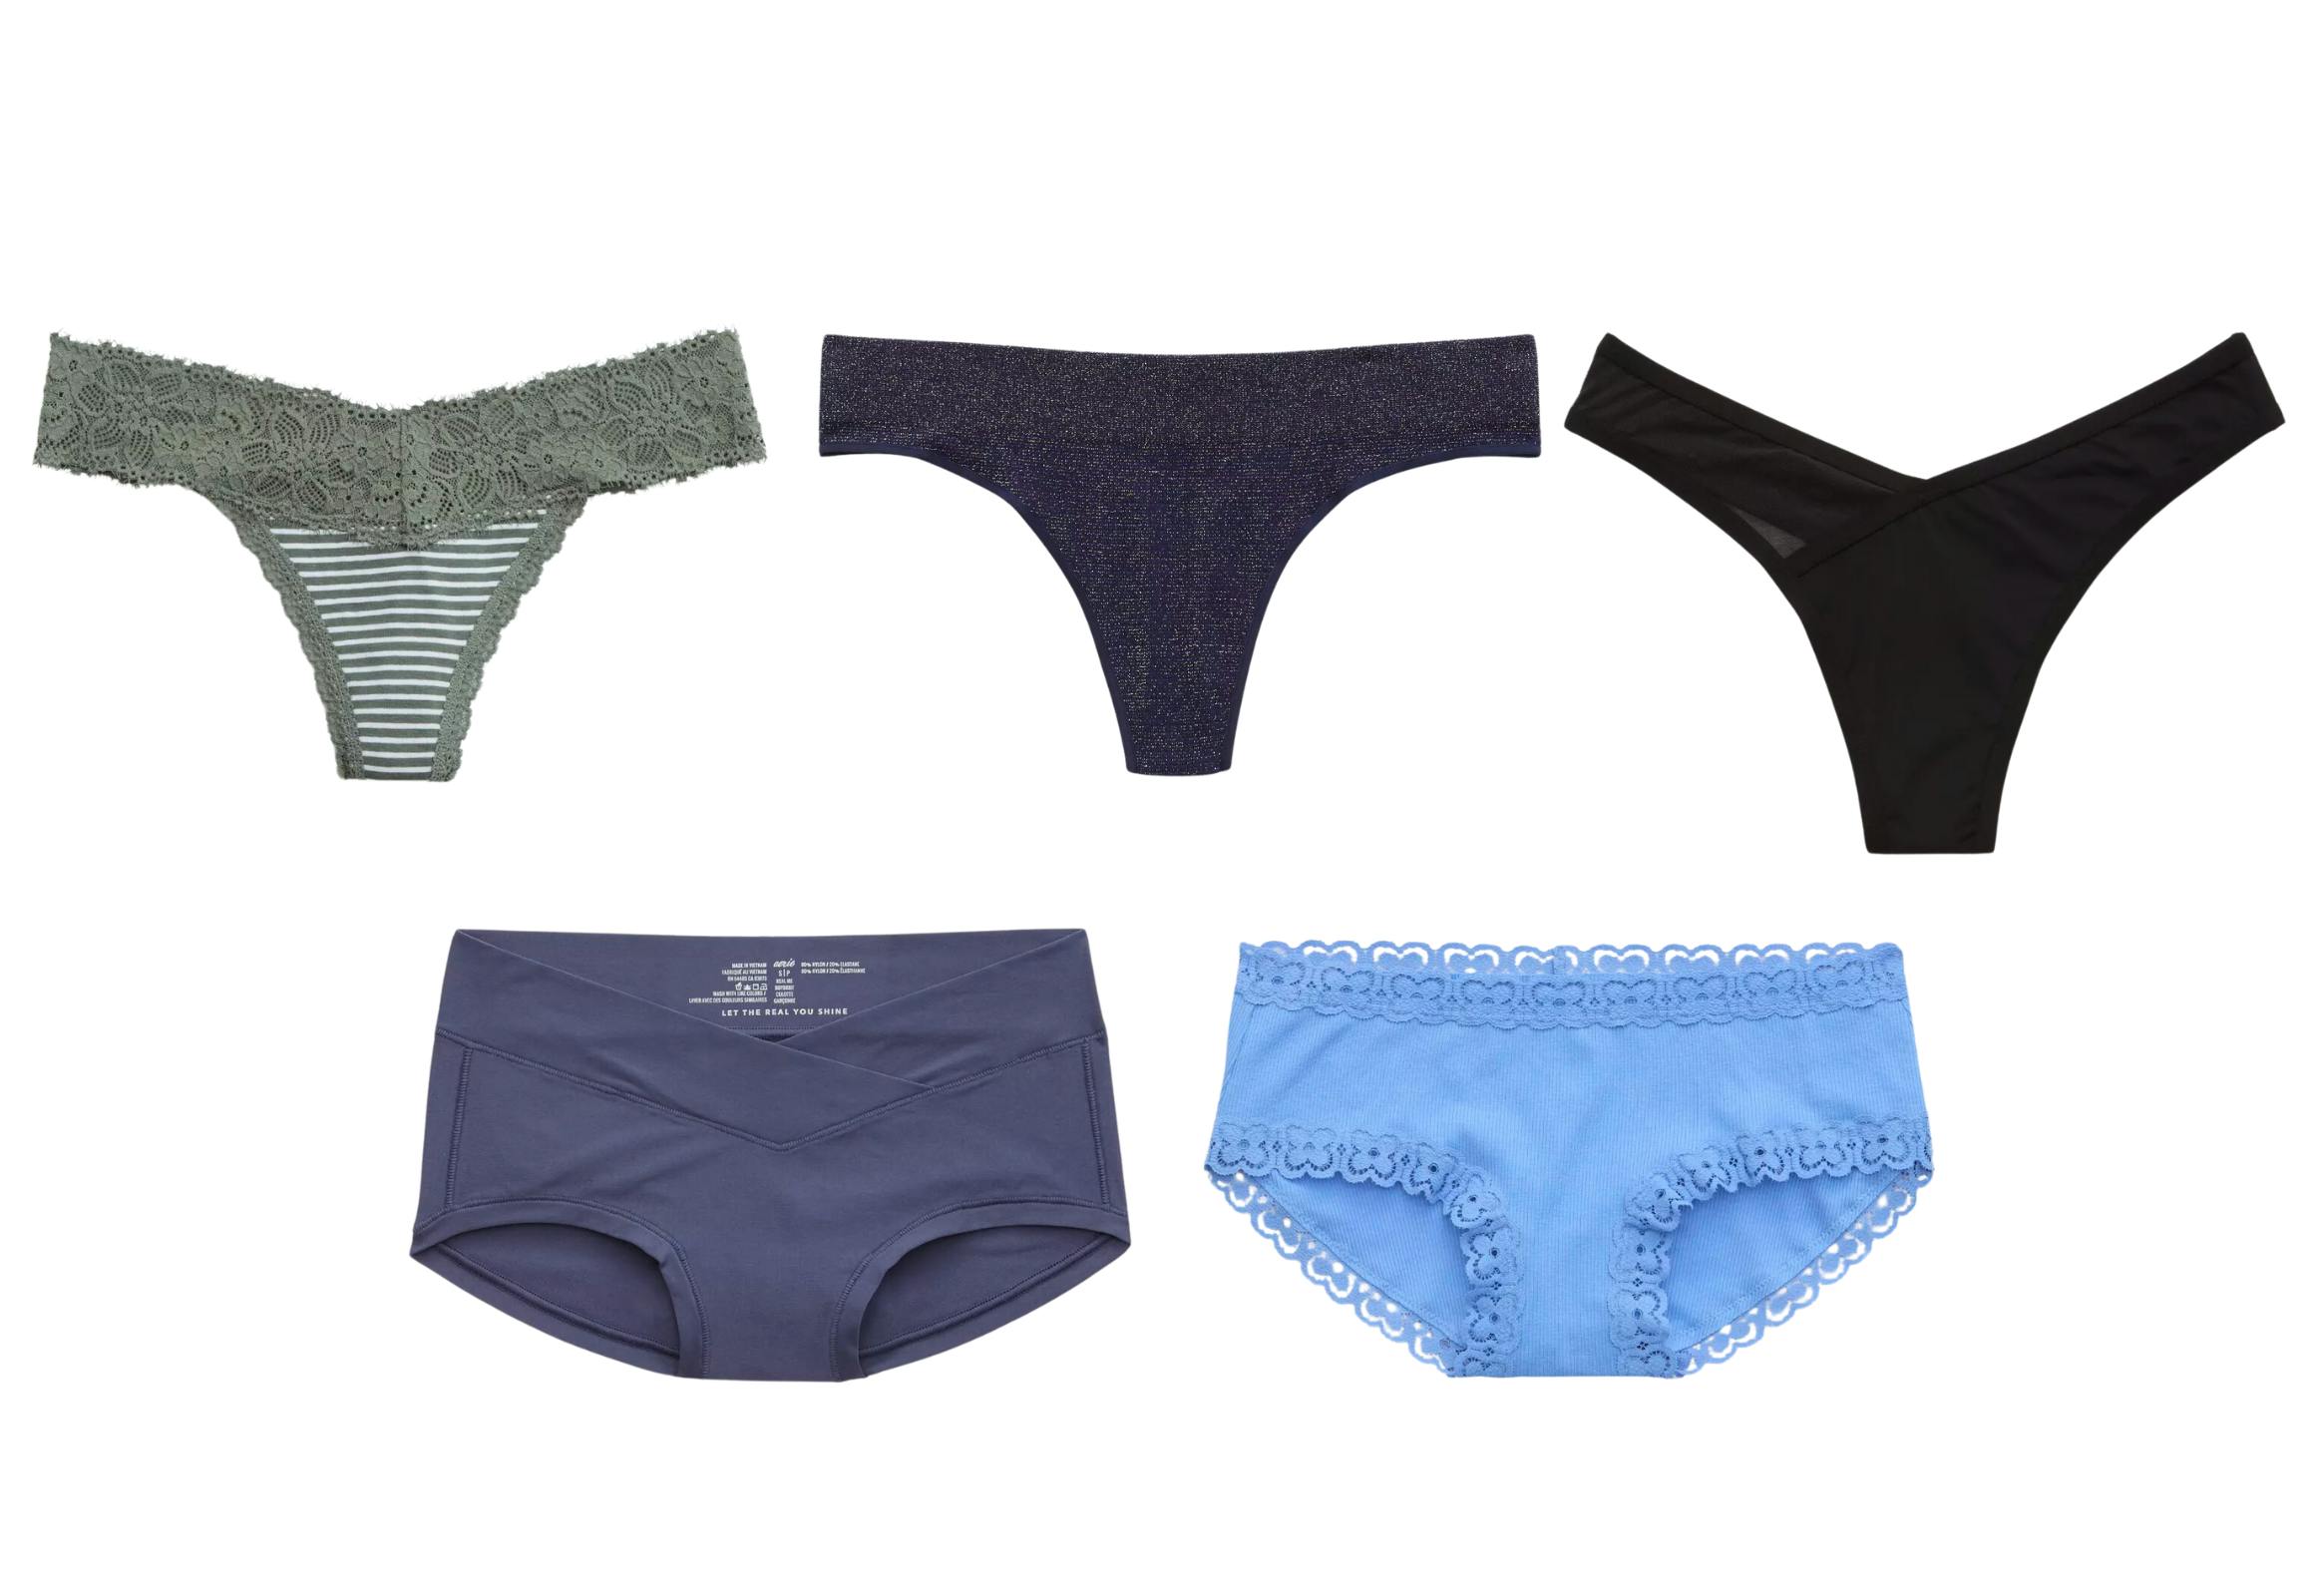 Get Five Clearance Undies for Just $10 at Aerie - The Krazy Coupon Lady